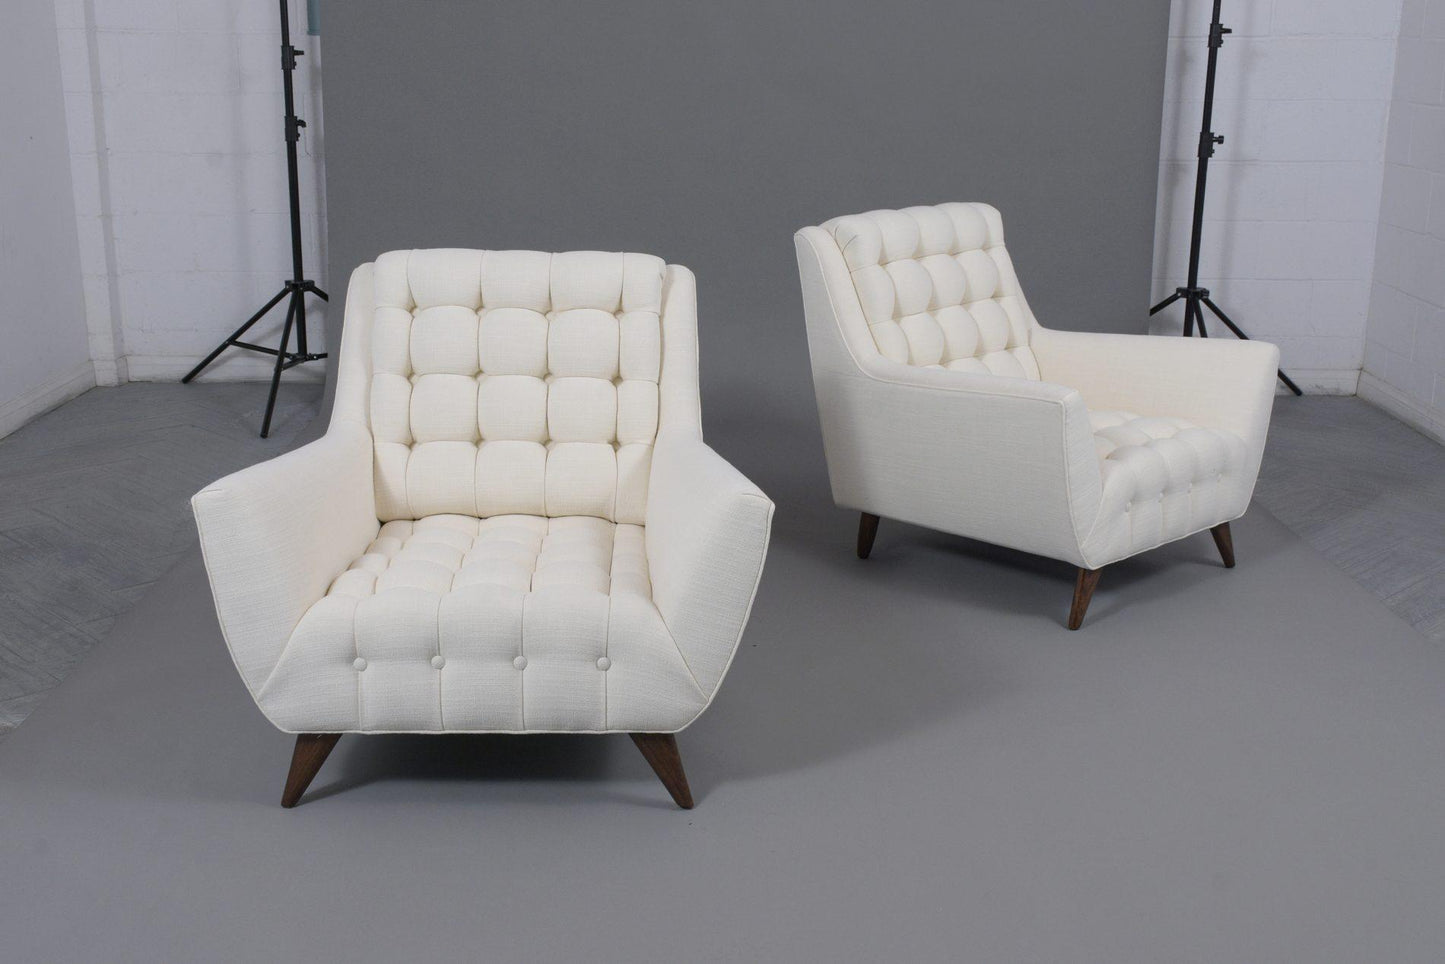 Pair of Mid-Century Biscuit Tufted Lounge Chairs